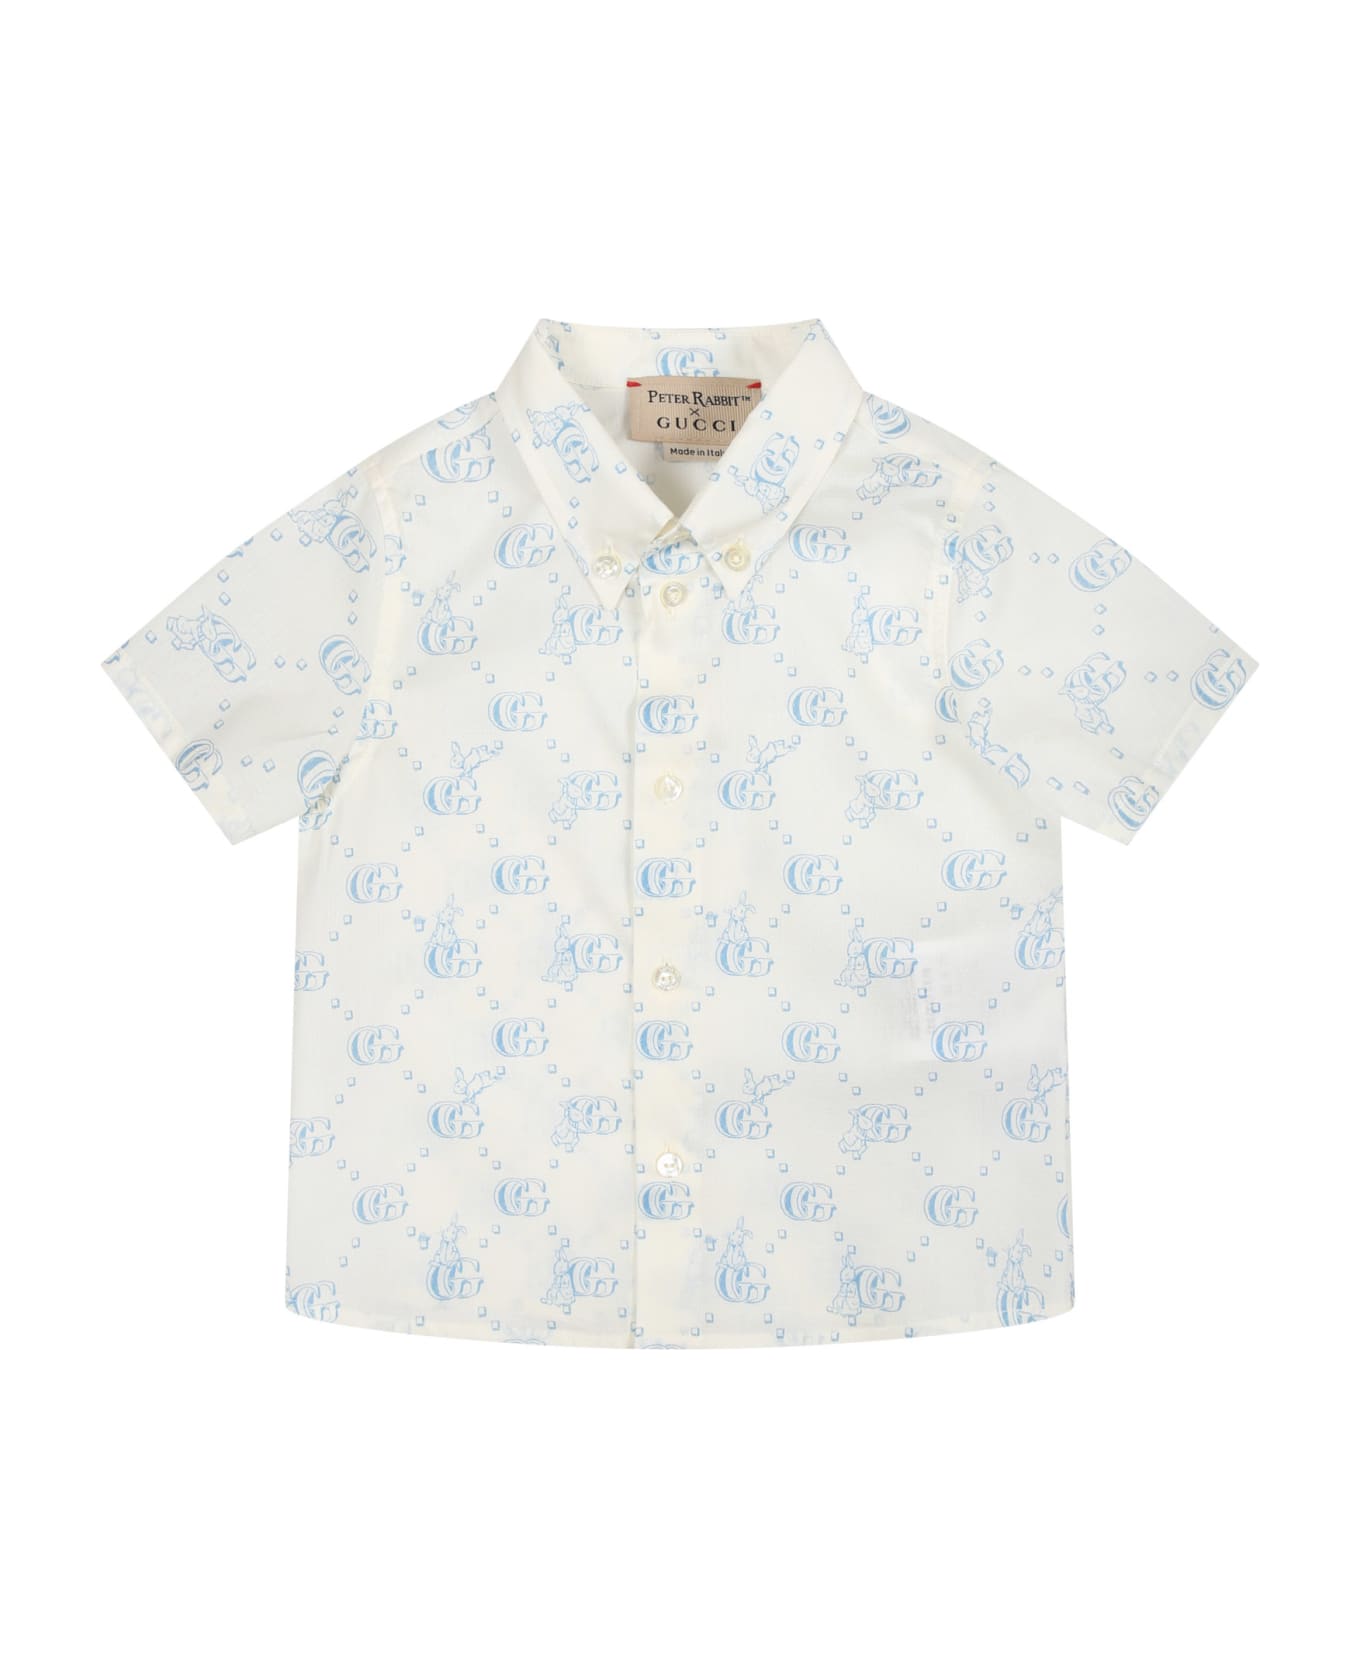 Gucci White Shirt For Baby Girl With Light Blue Gg And Rabbit Logo - White